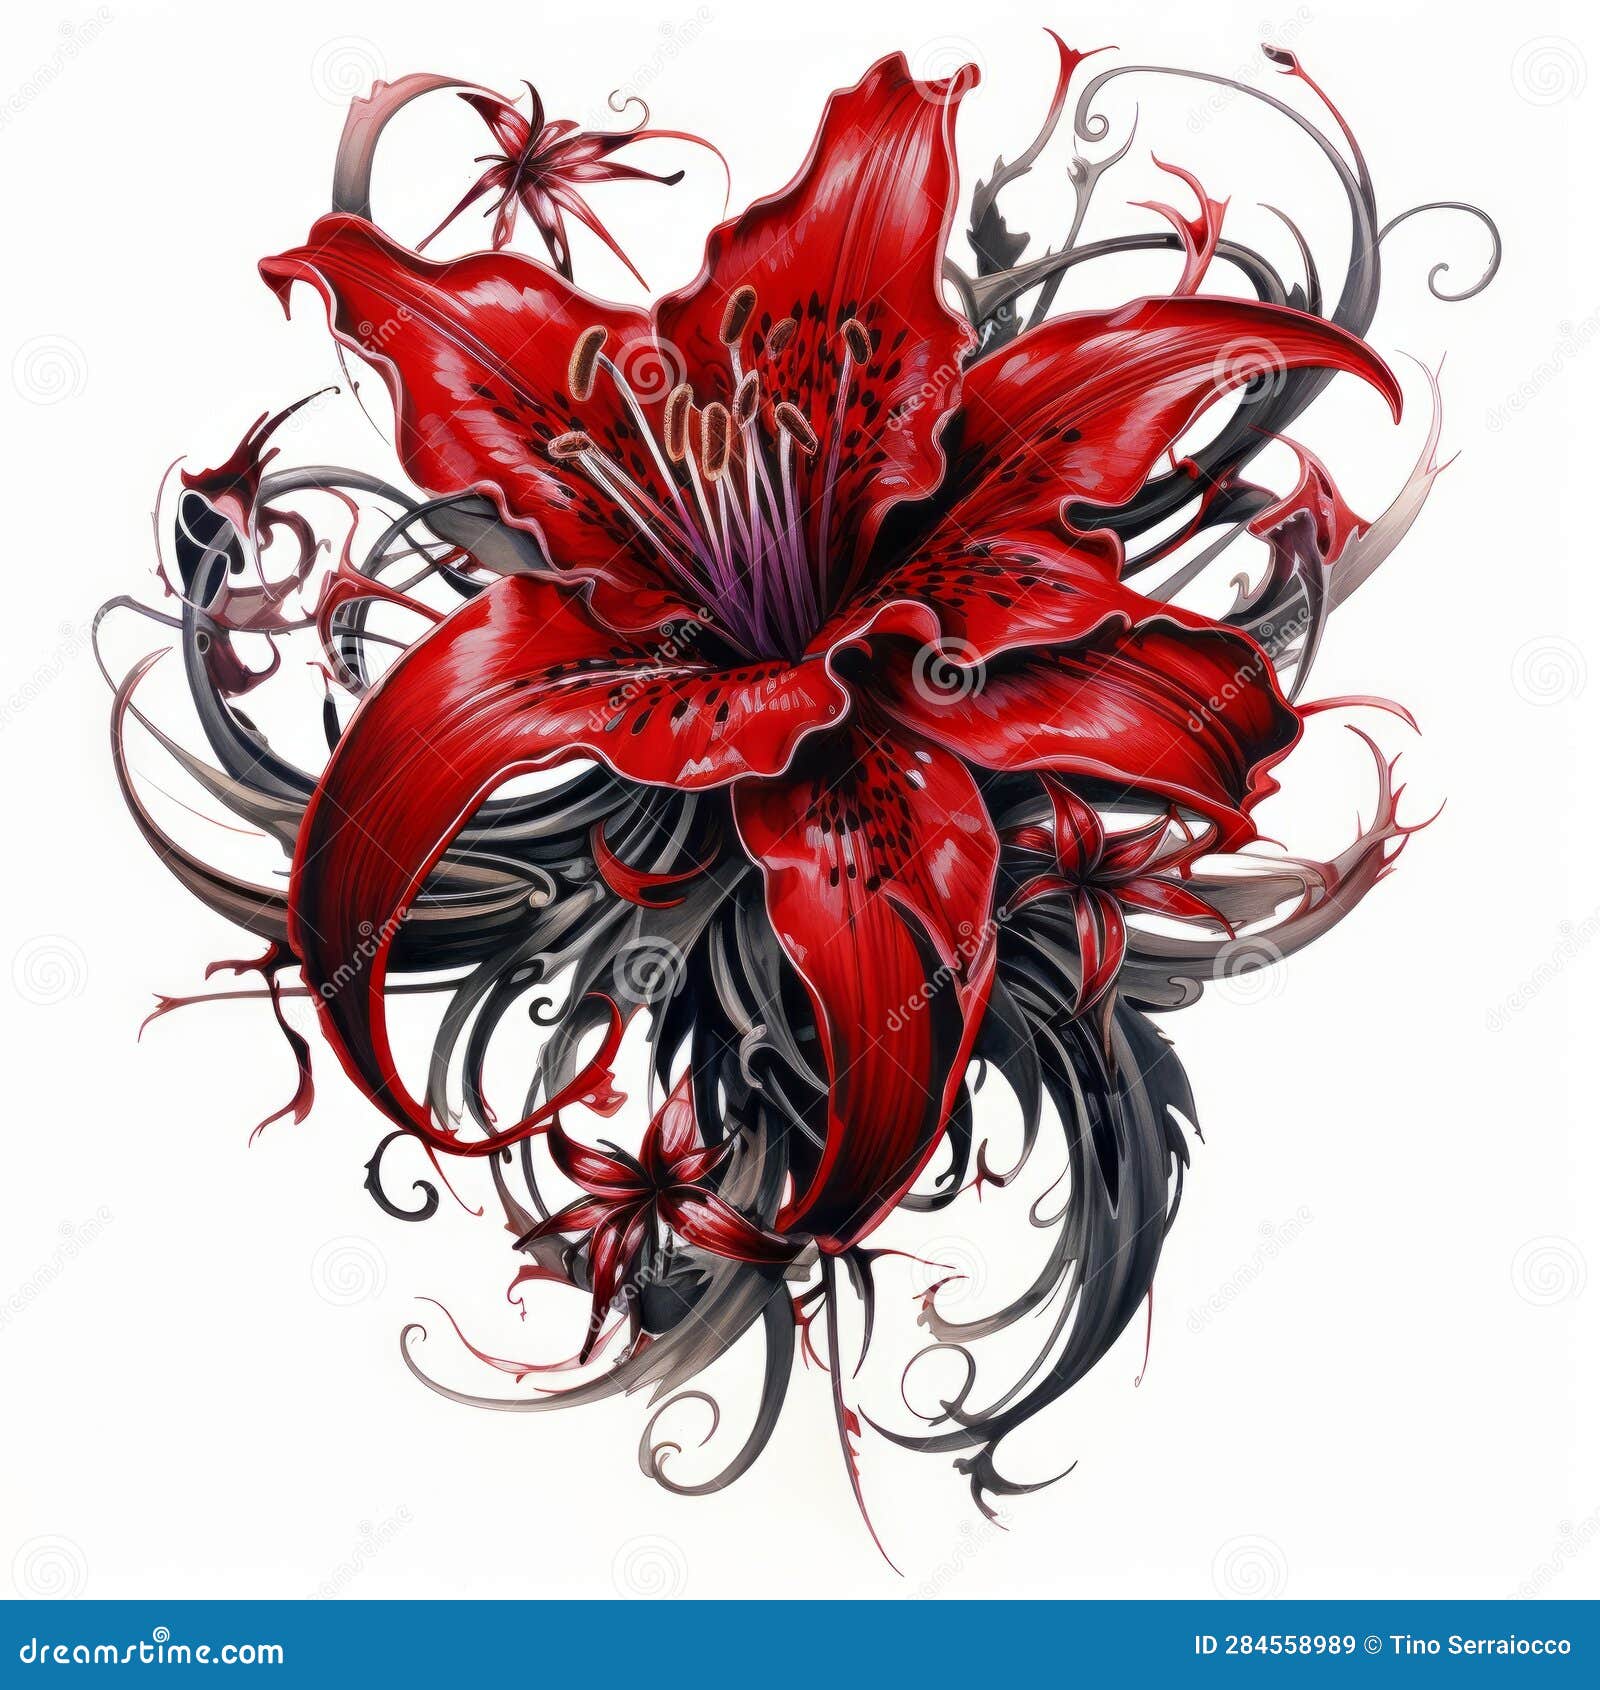 Red Spider Lily tattoo on the inner forearm